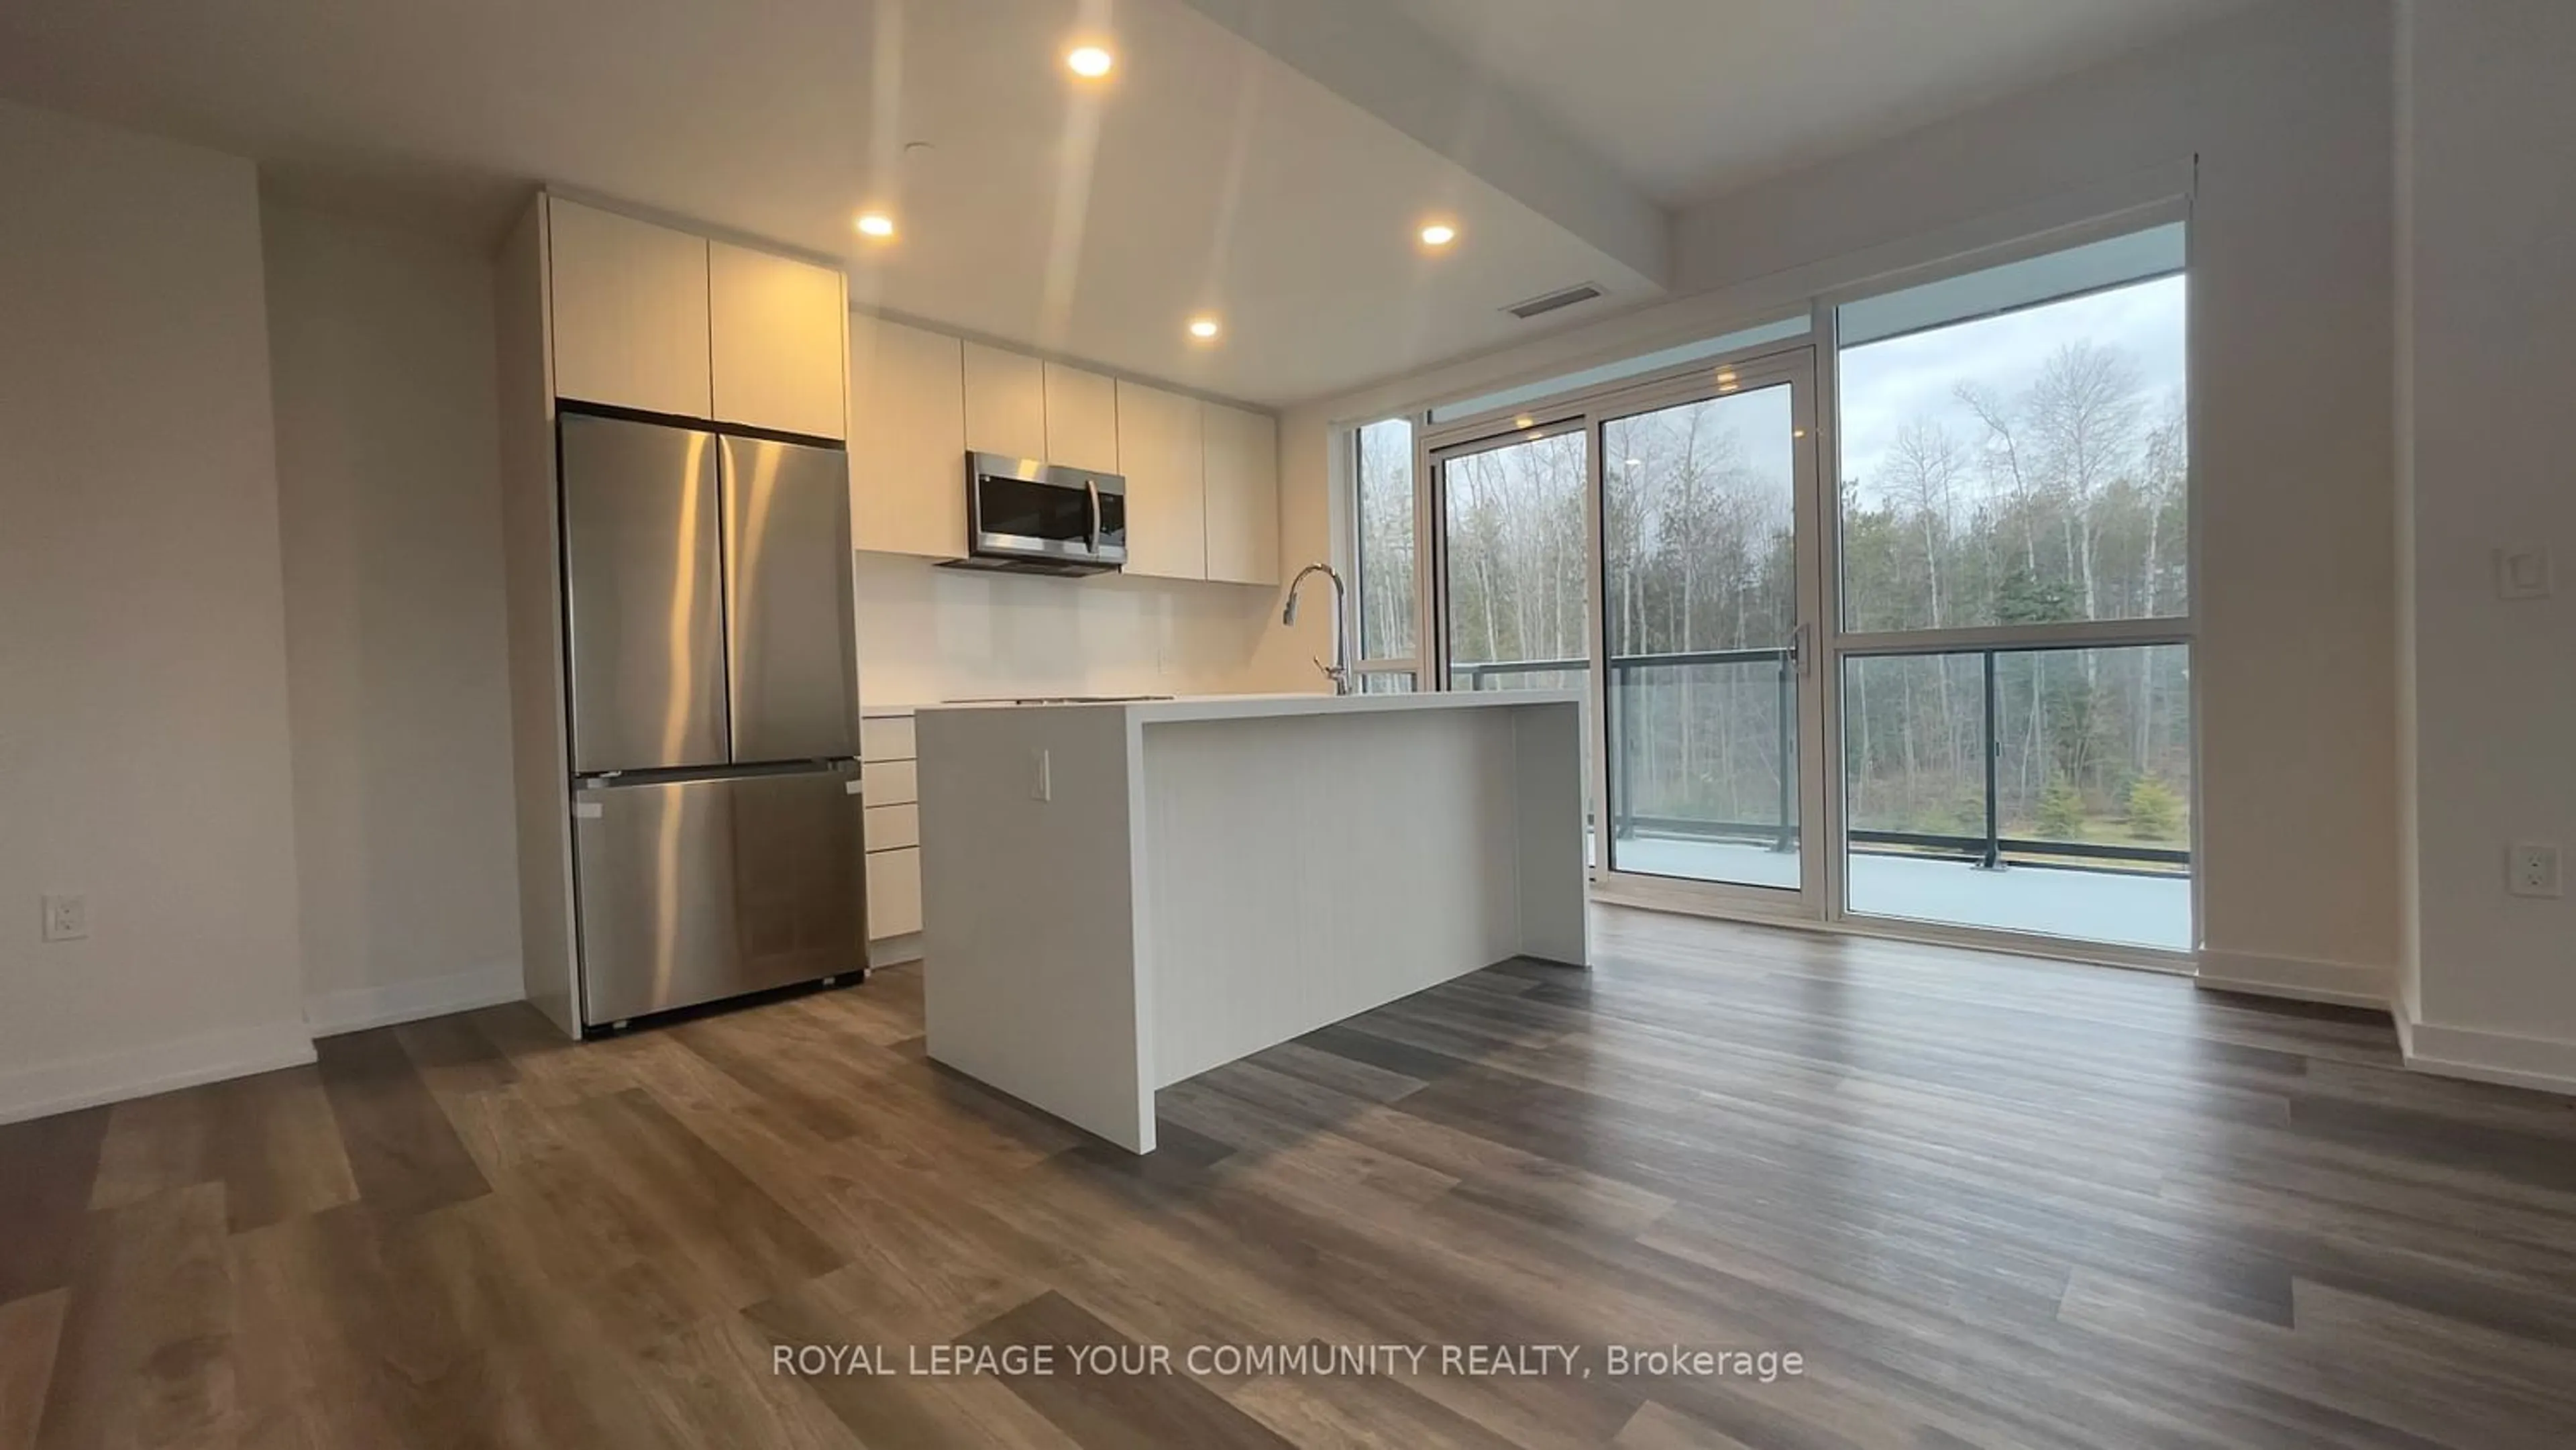 Contemporary kitchen for 415 Sea Ray Ave #351, Innisfil Ontario L9S 0R5